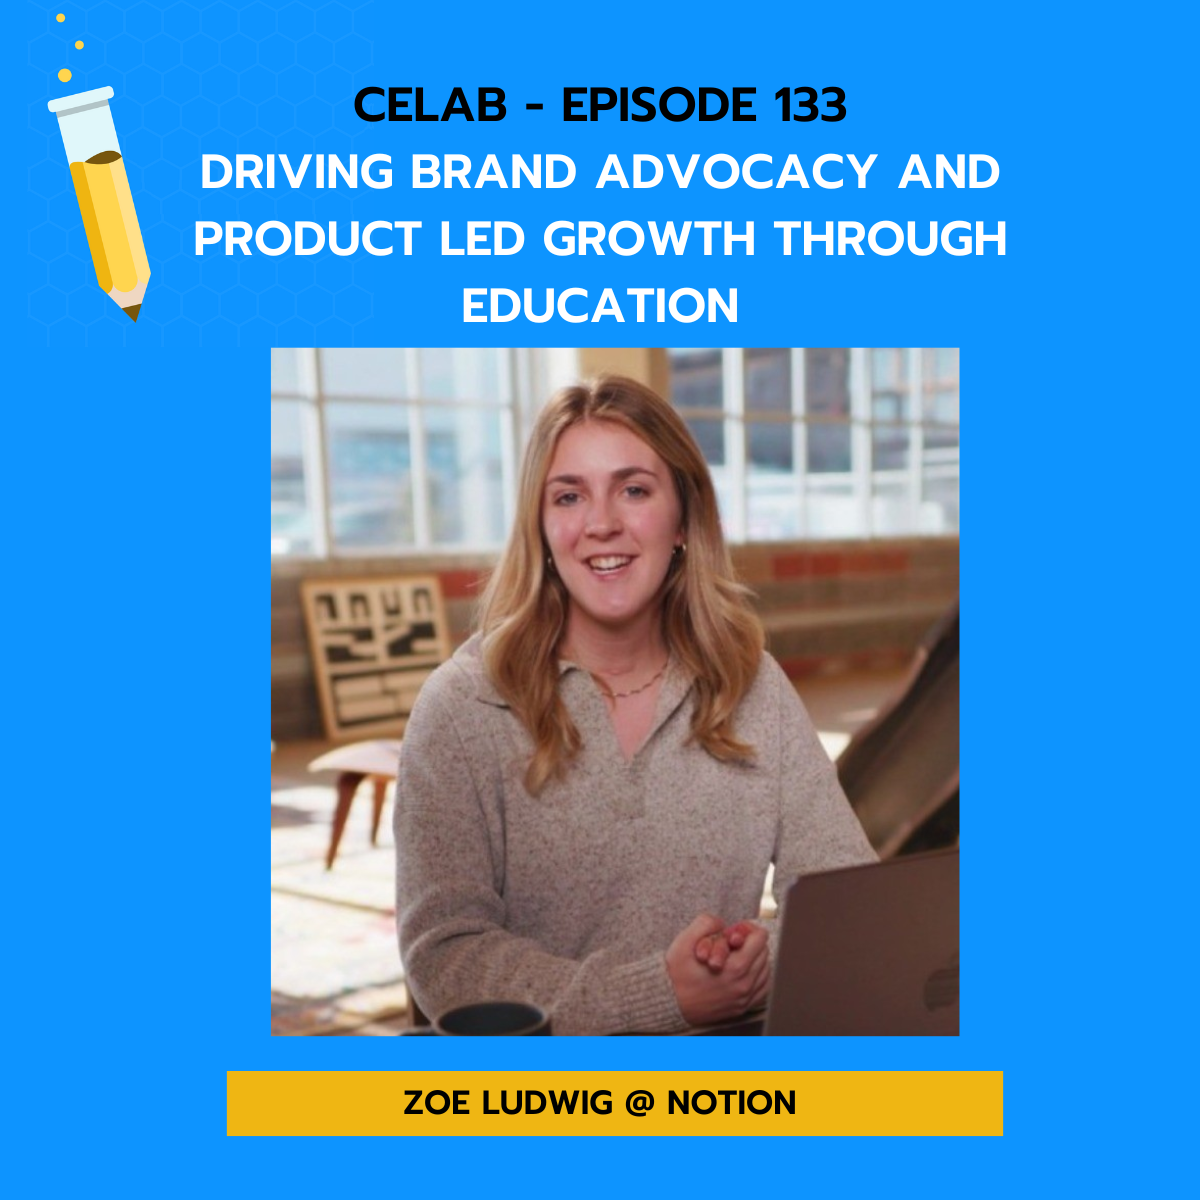 Episode 133 - Zoe Ludwig on Driving Brand Advocacy and Product Led Growth through Education